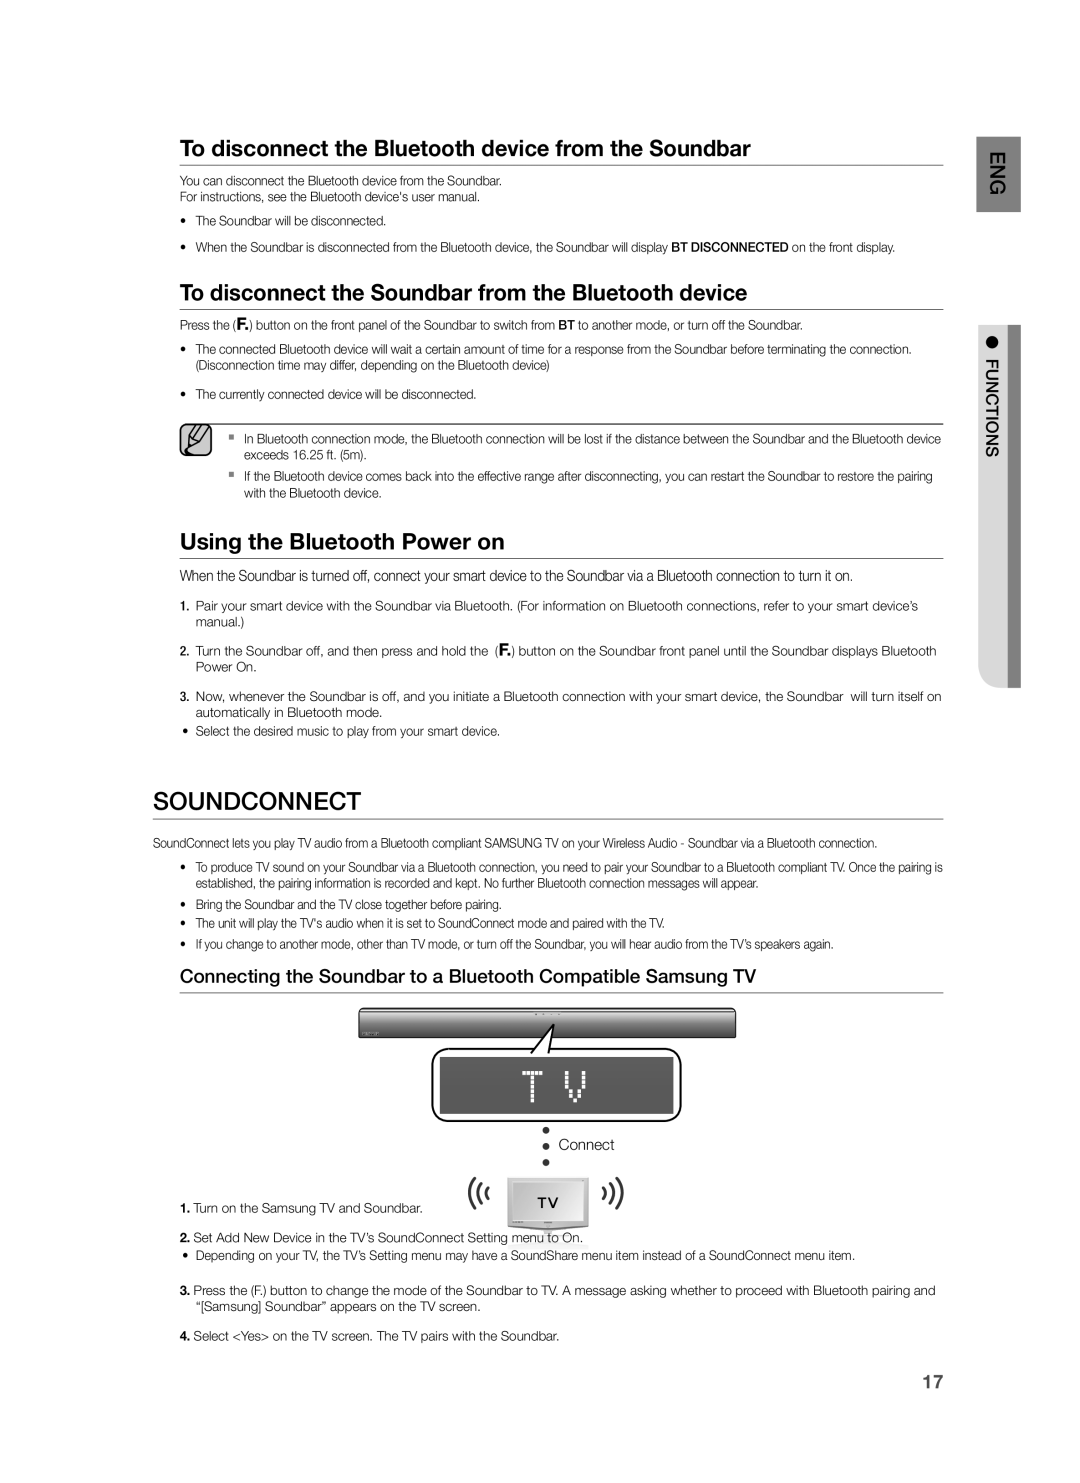 Samsung HW-H551/TK manual Soundconnect, To disconnect the Bluetooth device from the Soundbar, Using the Bluetooth Power on 